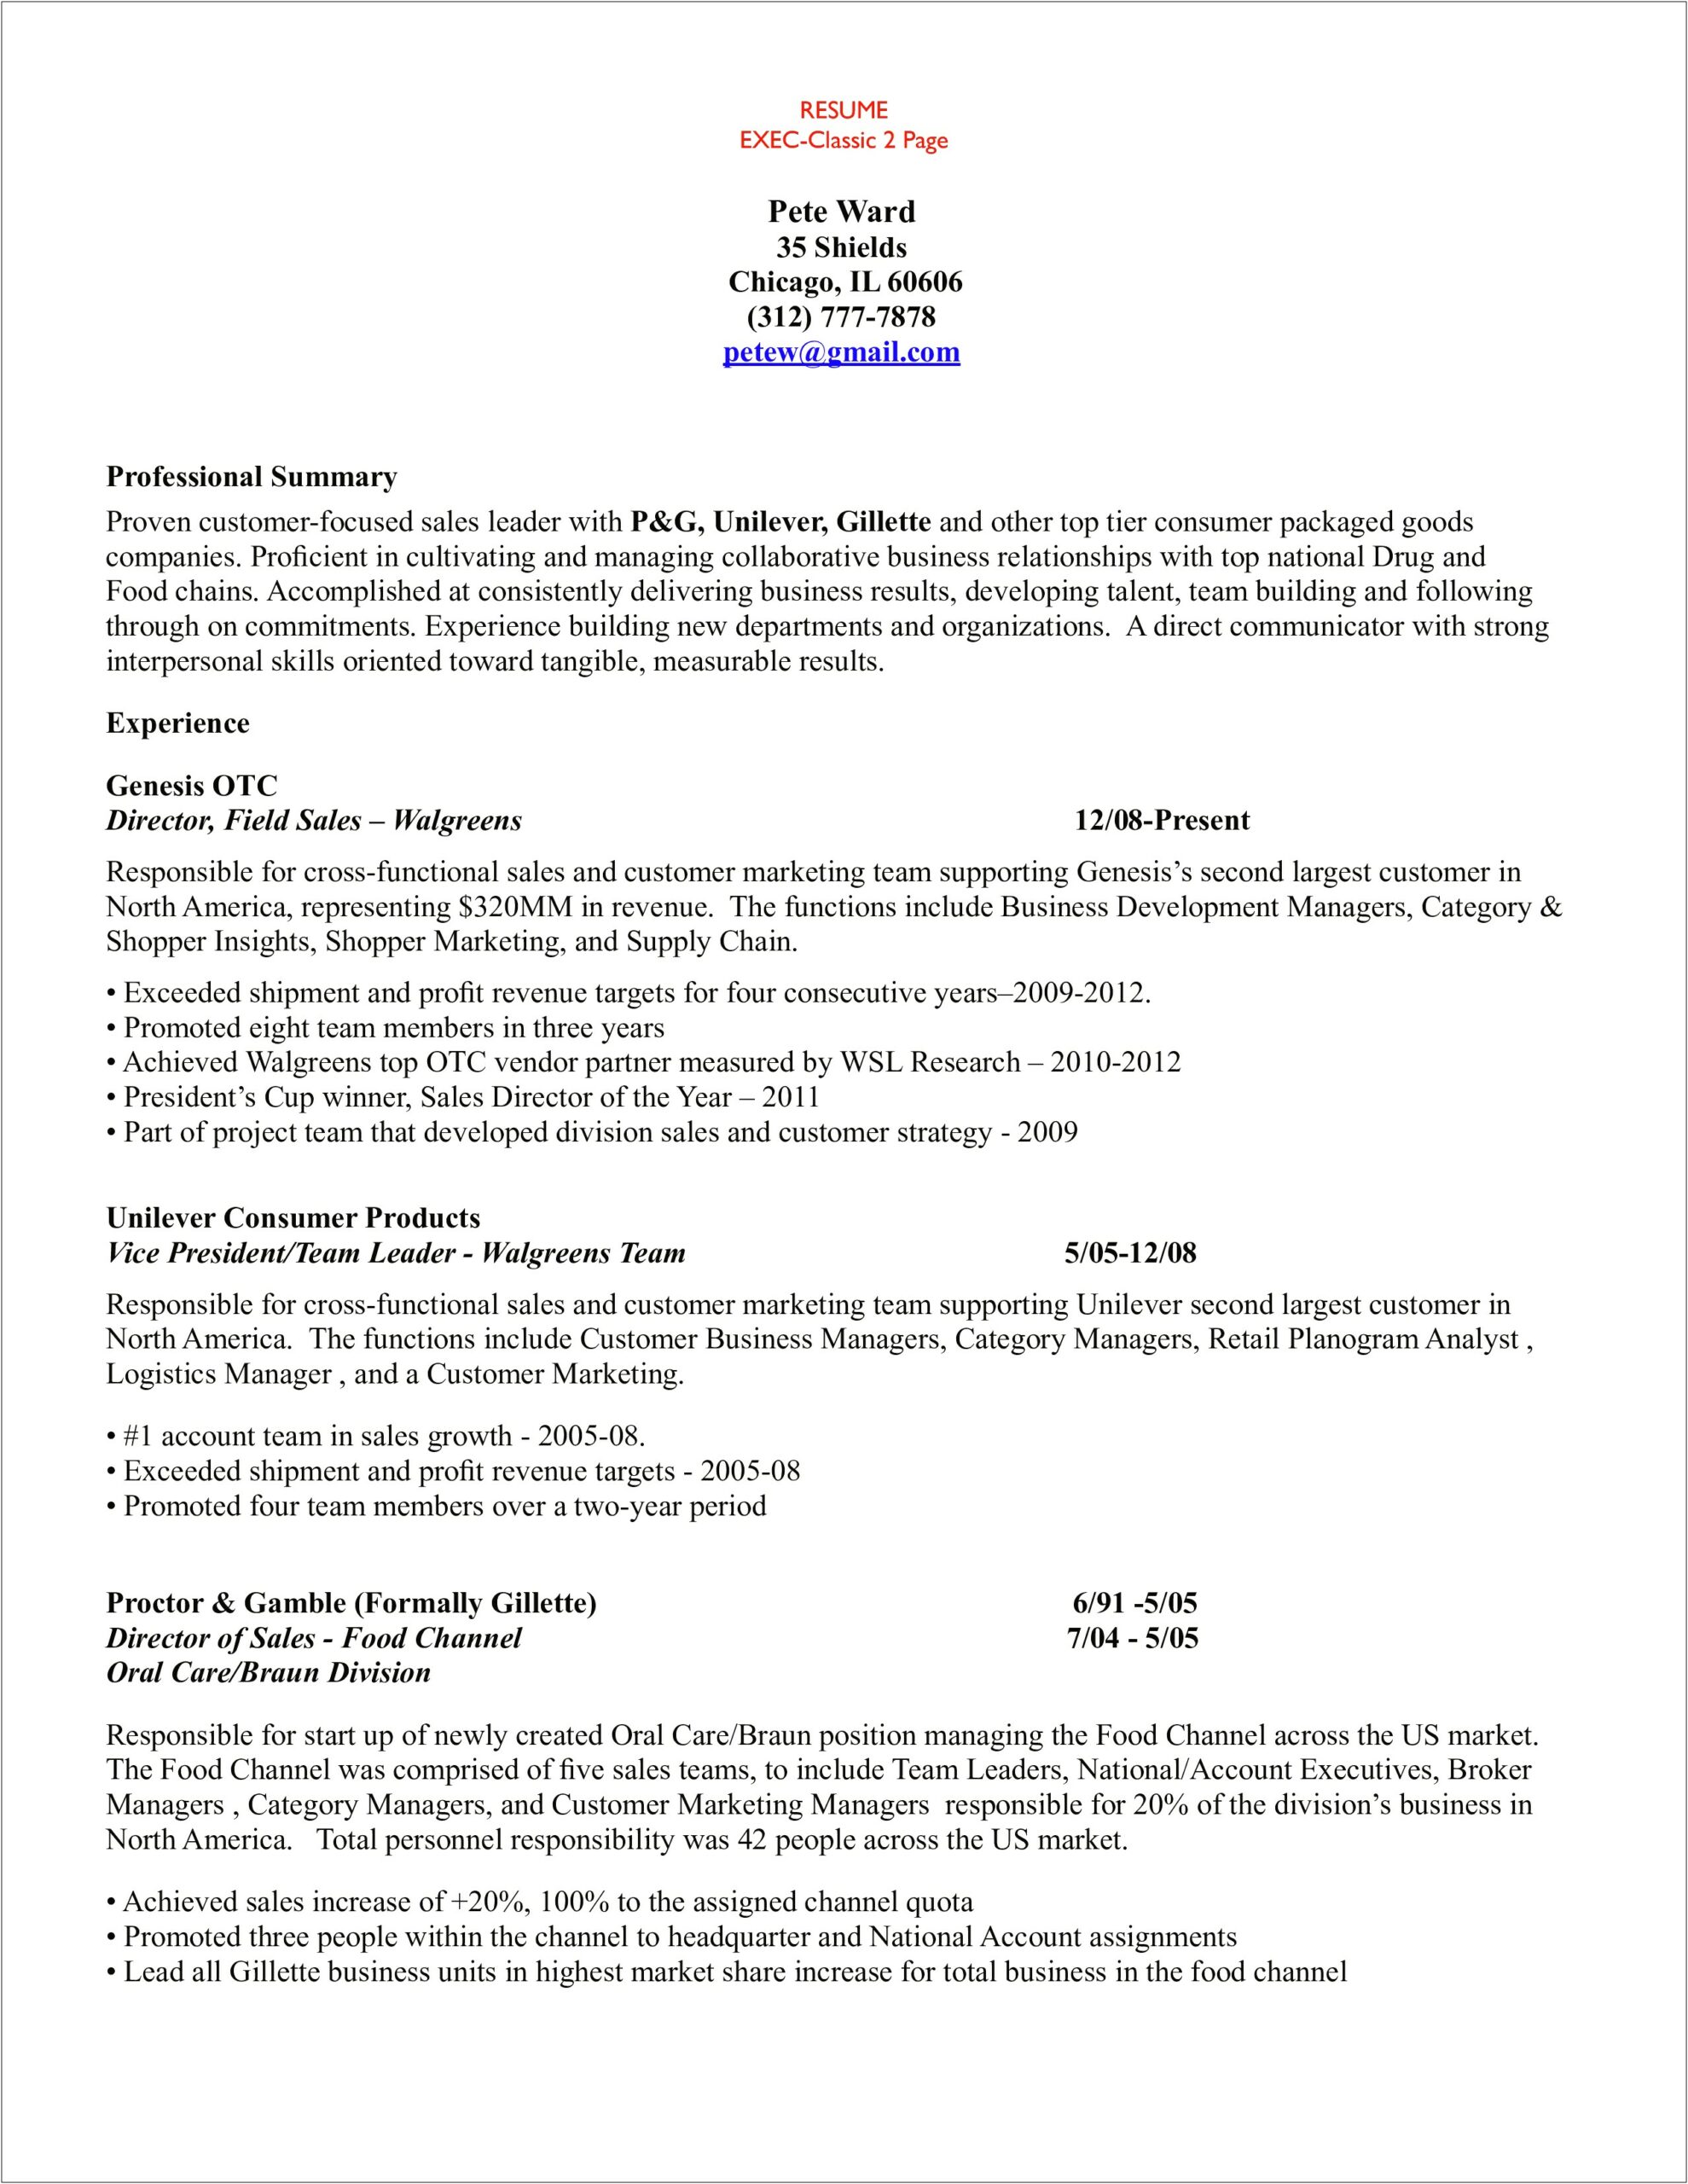 Consumers Goods Account Manager Resume Example